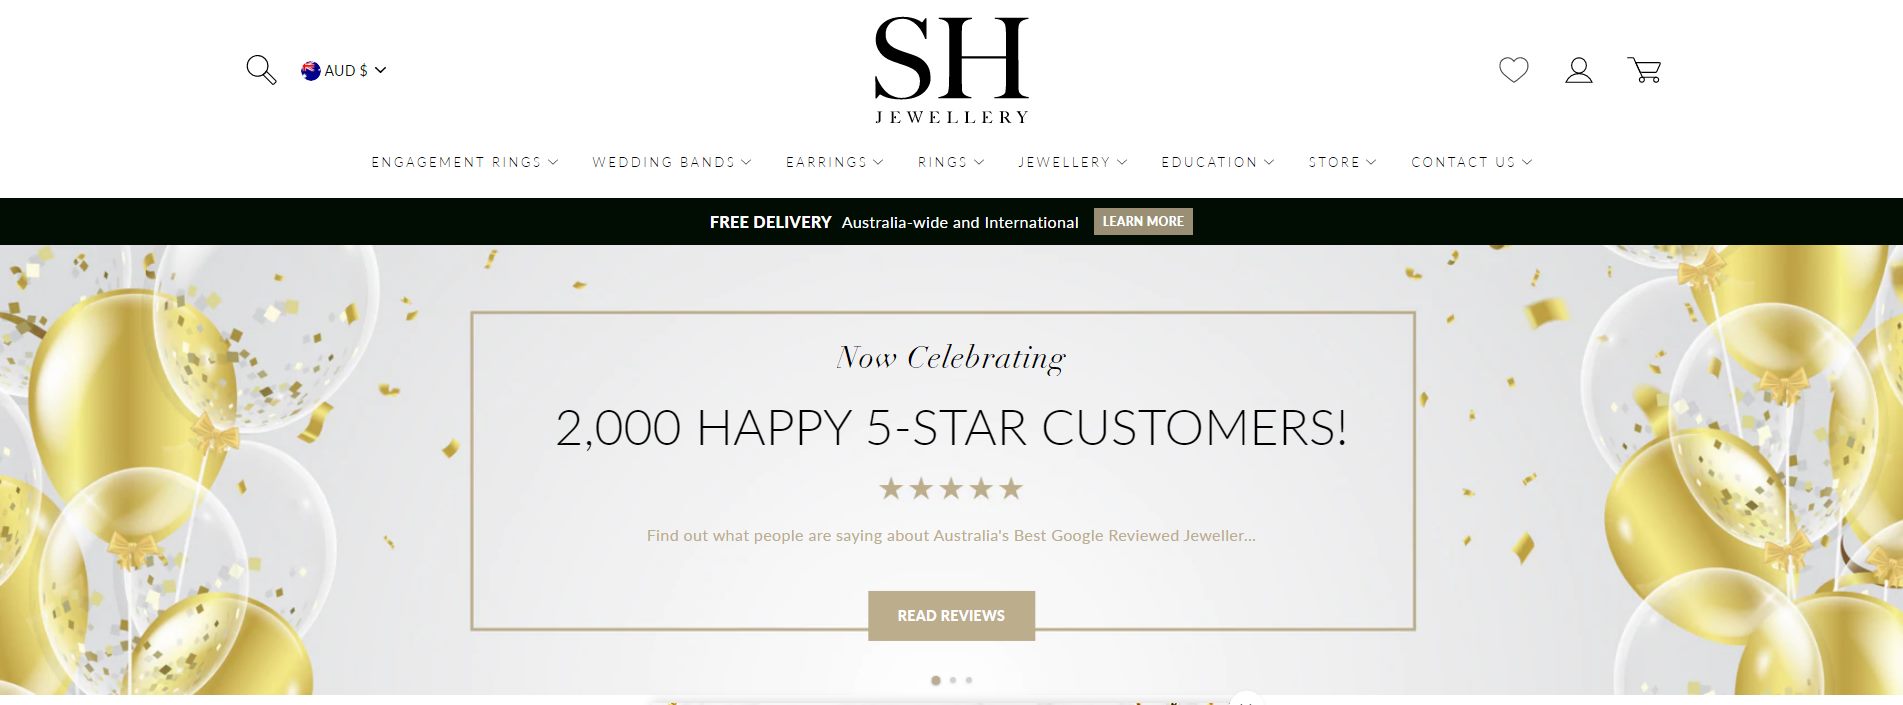 sh jewellery engagement rings & wedding band shop melbourne